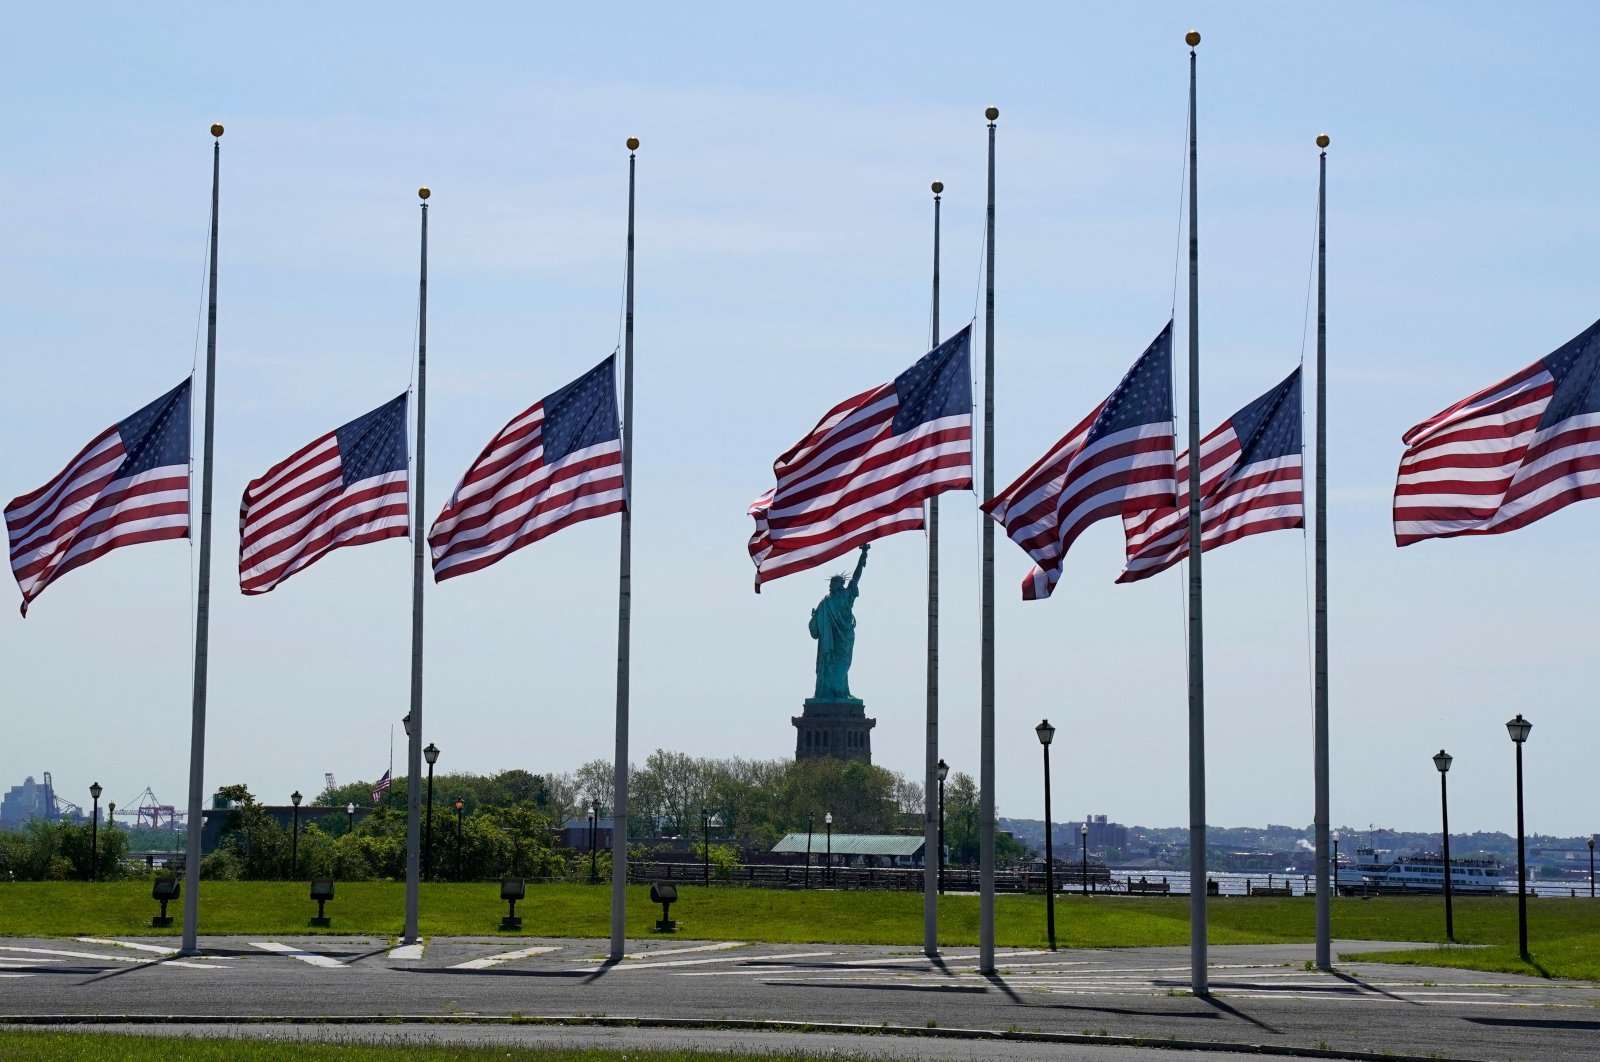 American flags flying at half mast in front of statue of liberty.